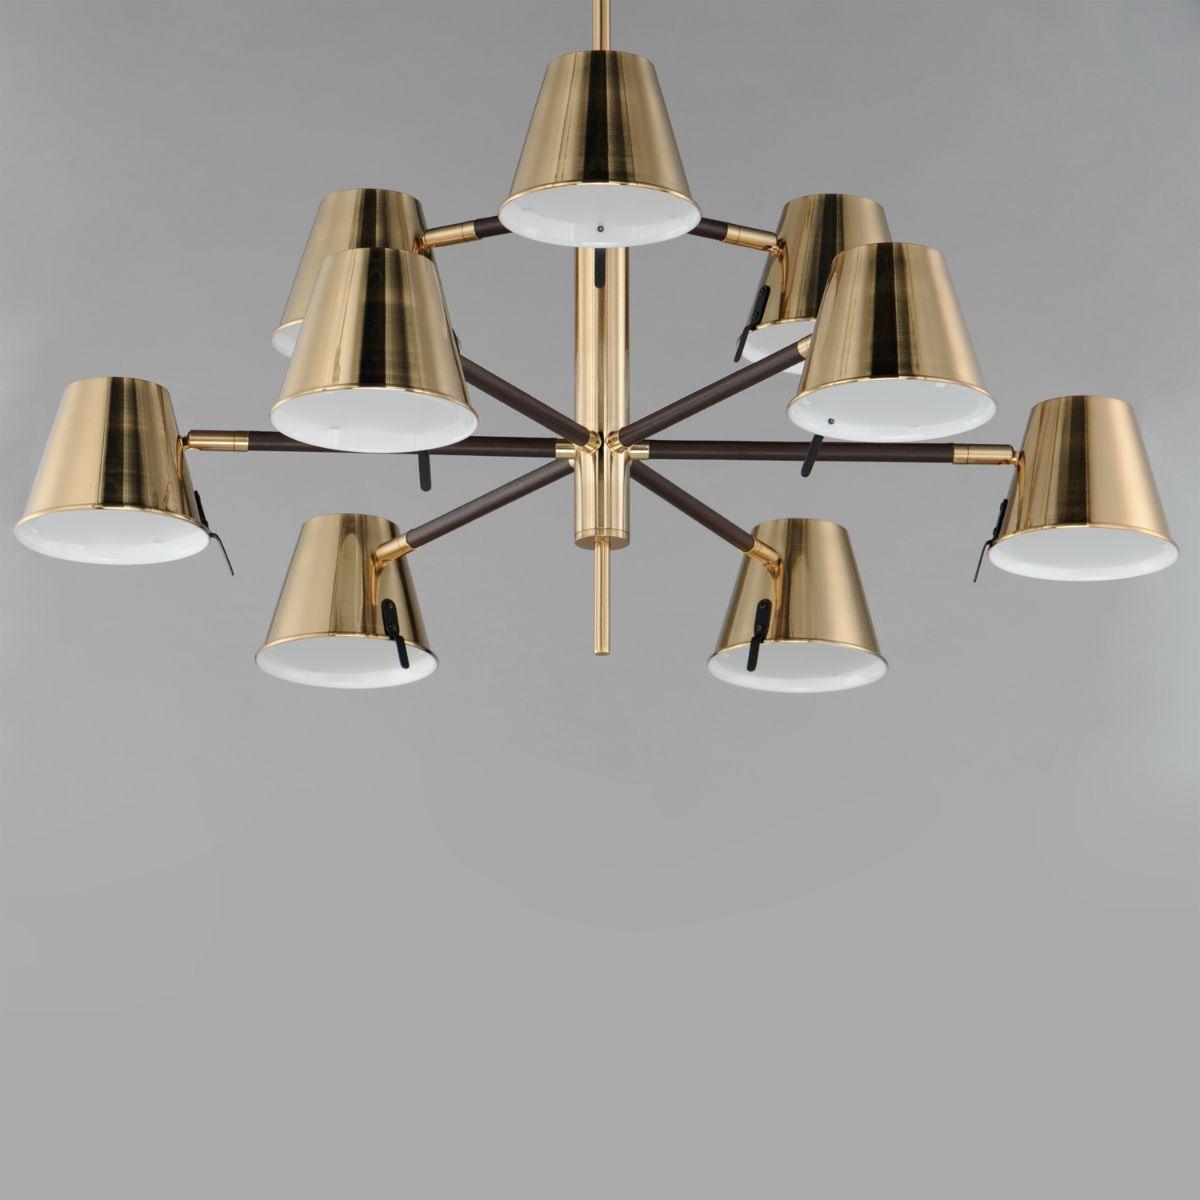 CARLO 34 in. 9 lights LED Chandelier Heritage Brass finish